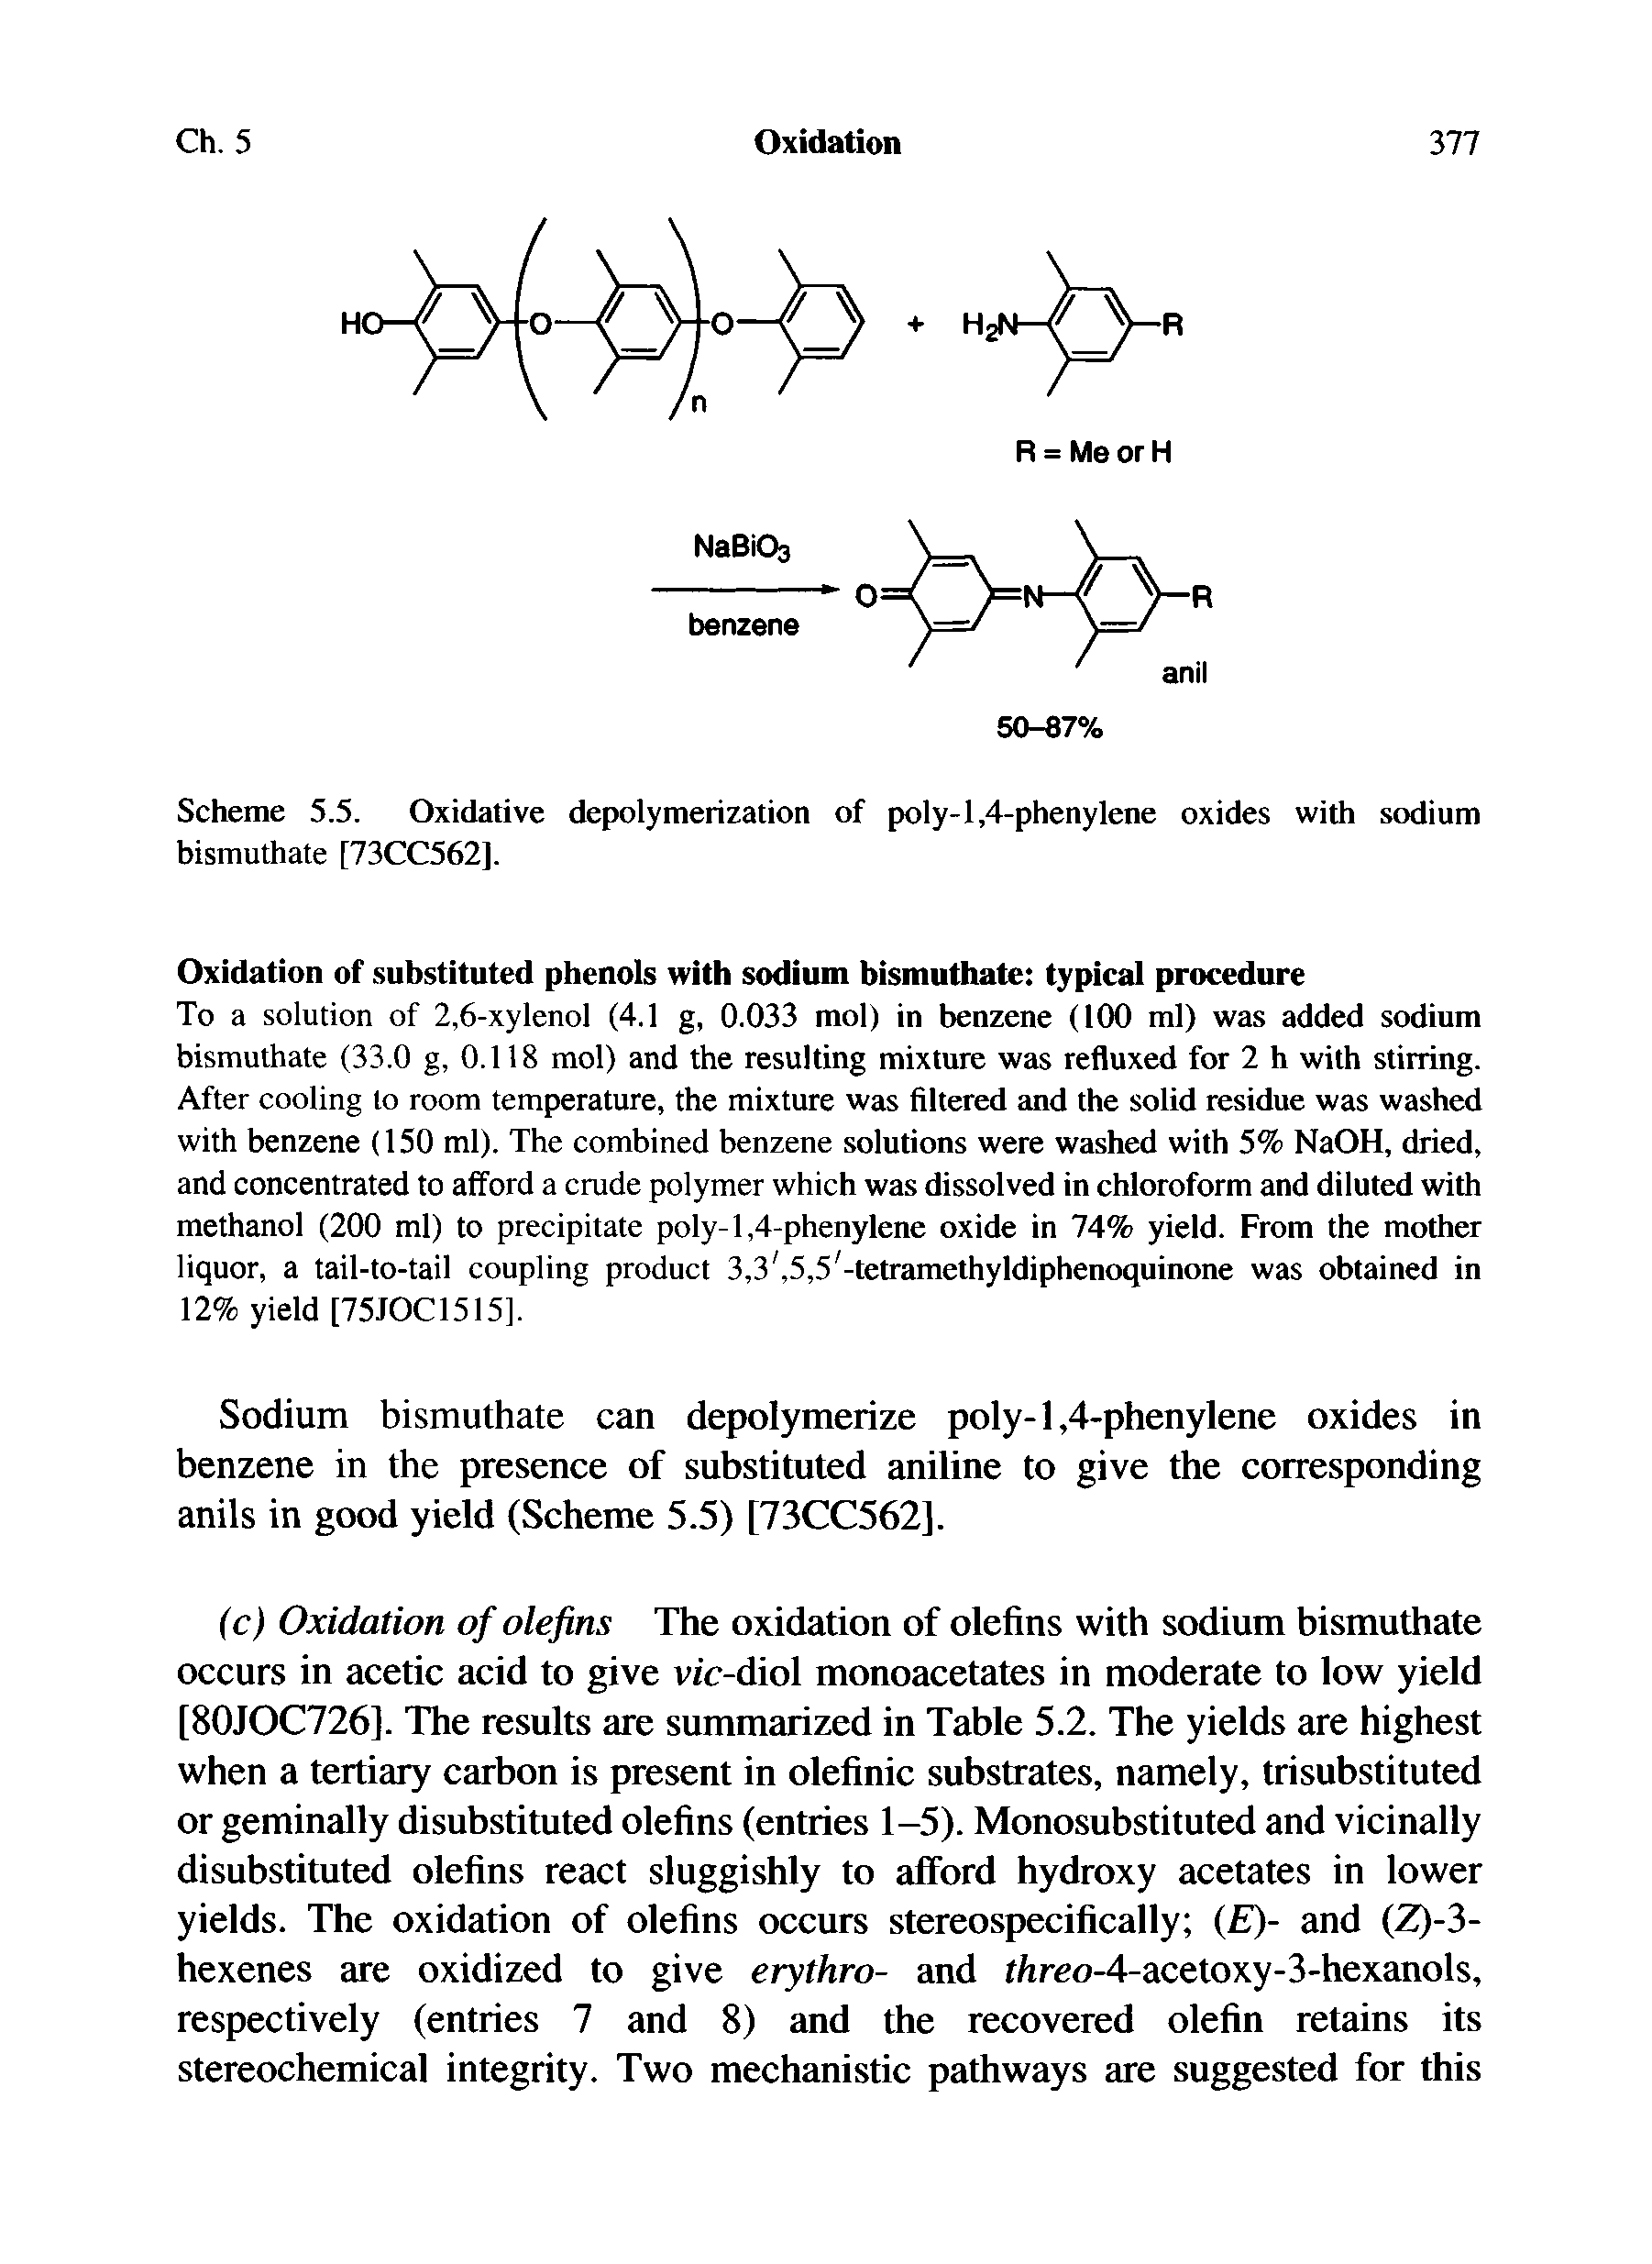 Scheme 5.5. Oxidative depolymerization of poly-l,4-phenylene oxides with sodium bismuthate [73CC562].